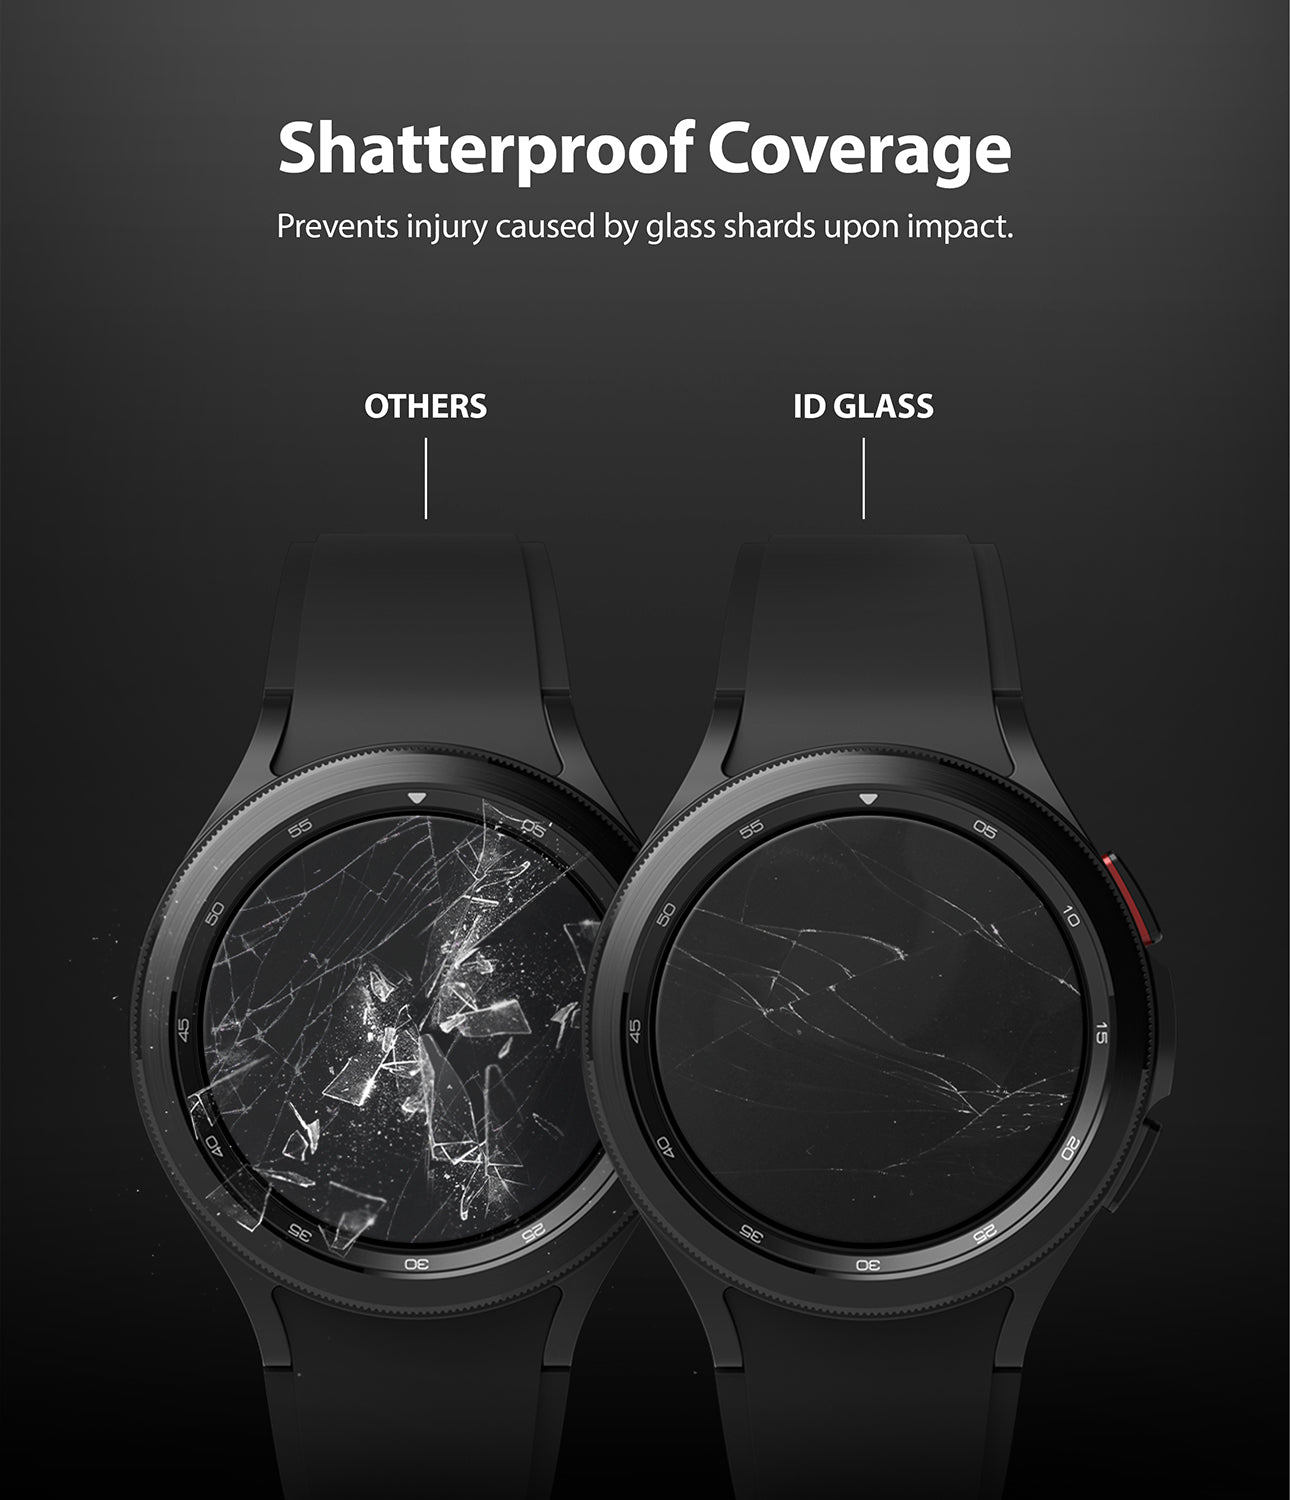 Galaxy Watch 4 Classic 42mm Screen Protector | Glass - R1 - Shatterproof Coverage. Prevents injury caused by glass shards upon impact.